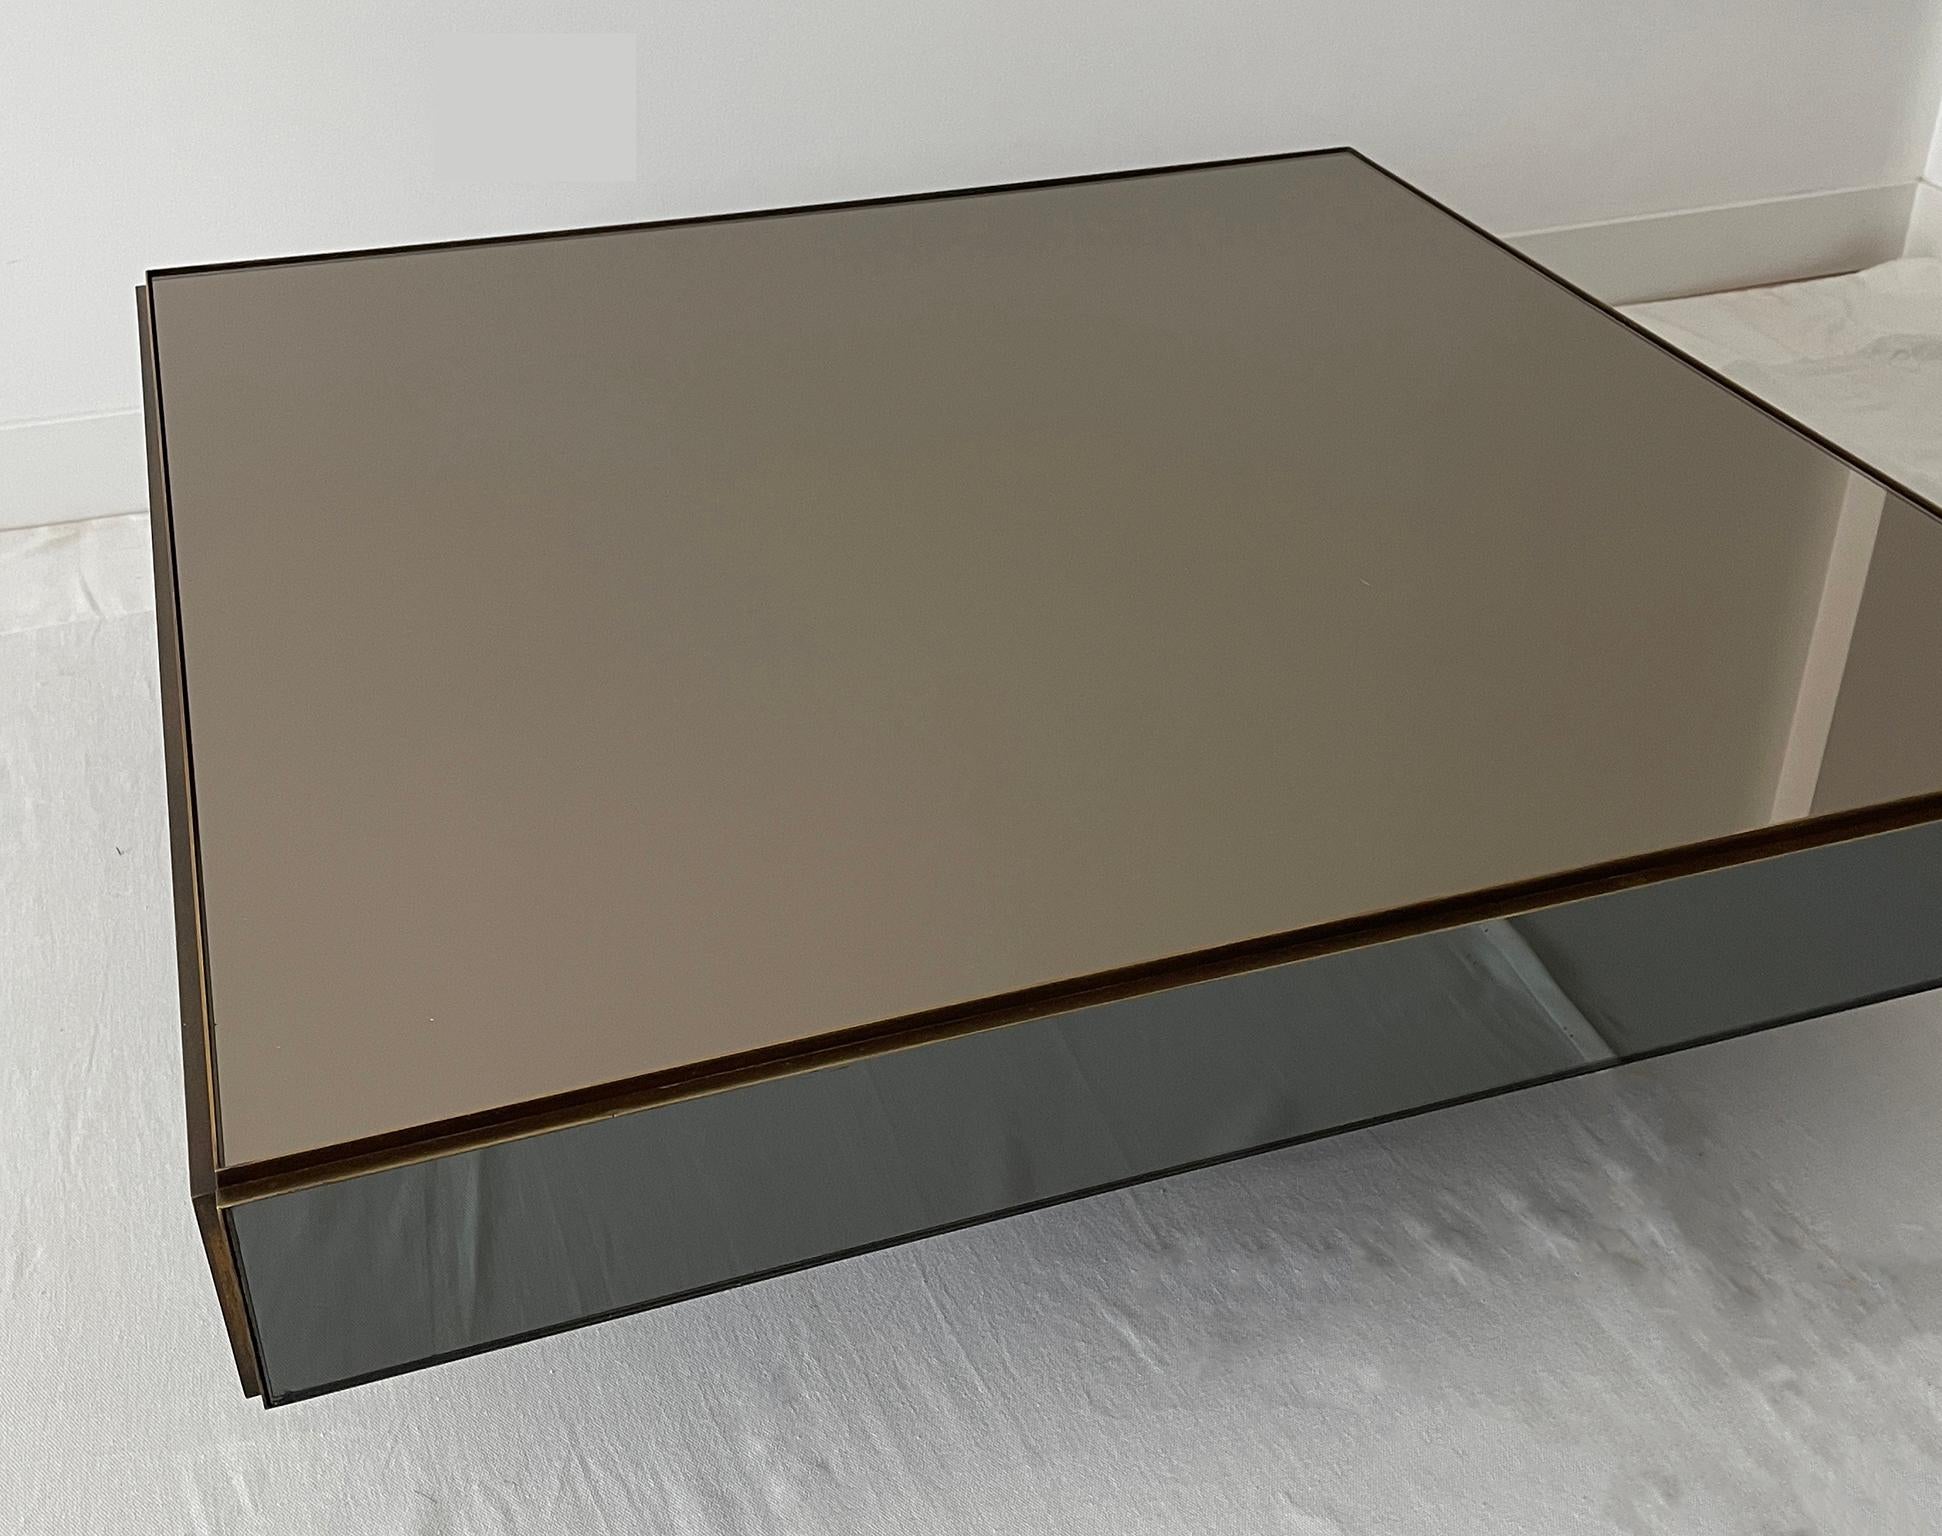 Elegant coffee or cocktail table in the style of the famous designer Willy Rizzo, this table represents very well the essence of design in the 70s, with a low height and great simplicity and elegance at the same time.
The table rests on a black